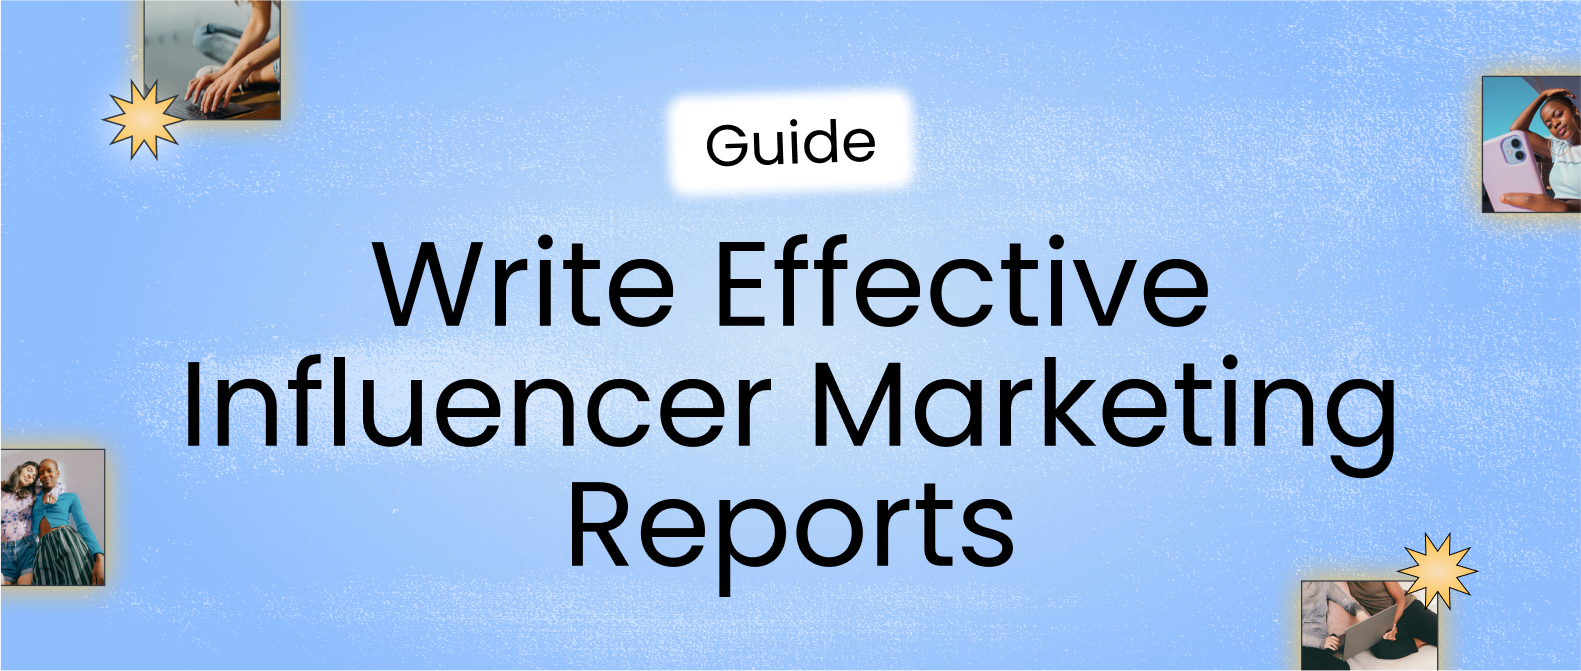 Free influencer marketing guide to campaign measurement and report creation.